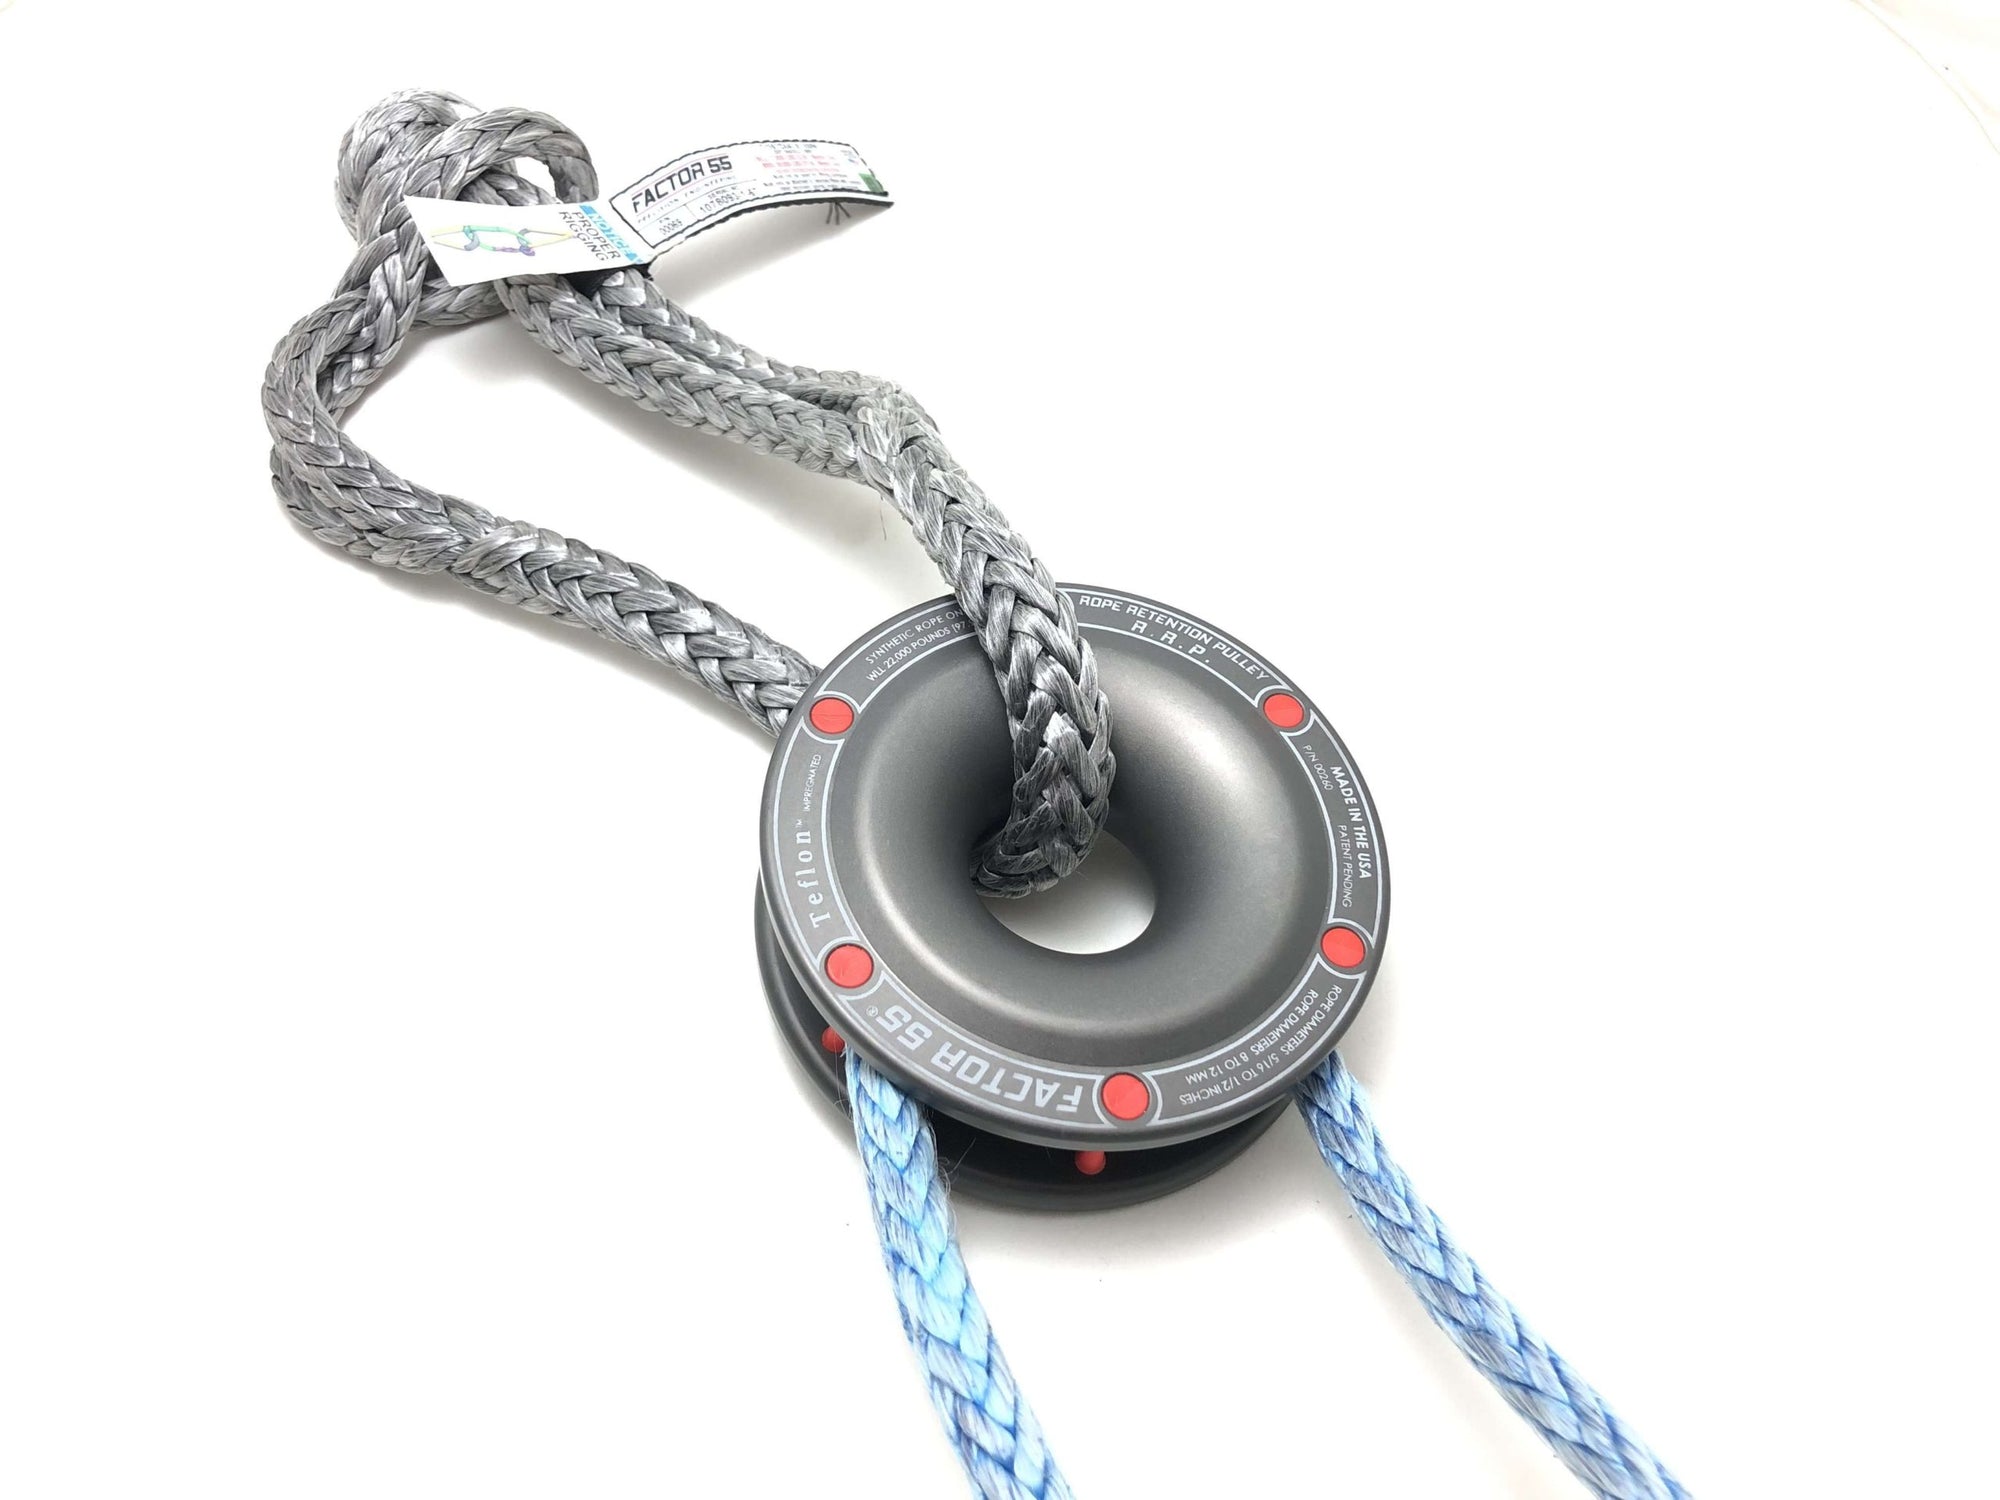 Factor 55 Rope Retention Pulley and Soft Shackle available at TreadHeadGarage